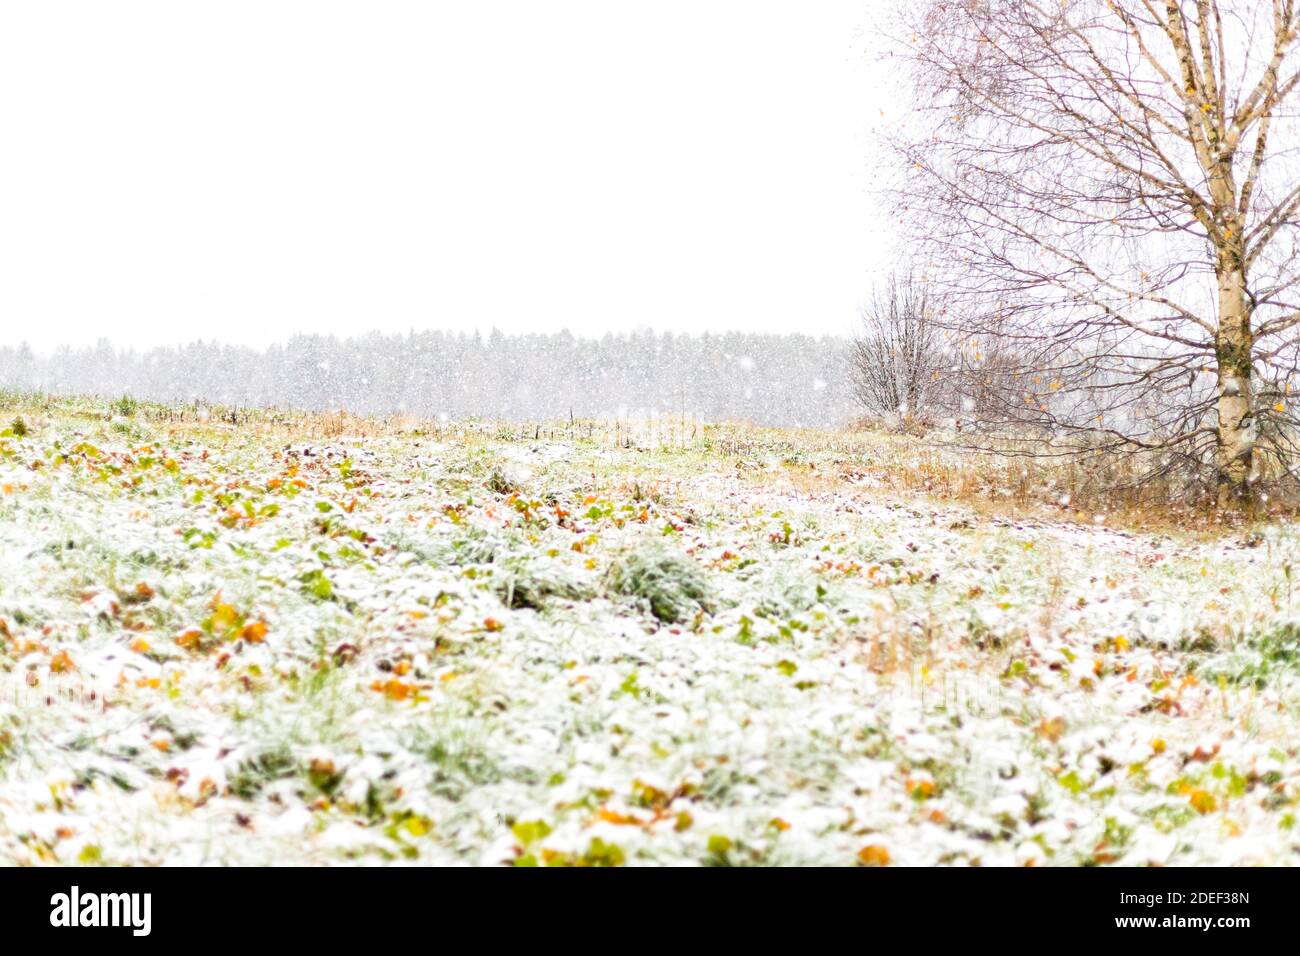 Winter Christmas landscape natural background of field meadow, single tree, snow falling snowflakes Stock Photo